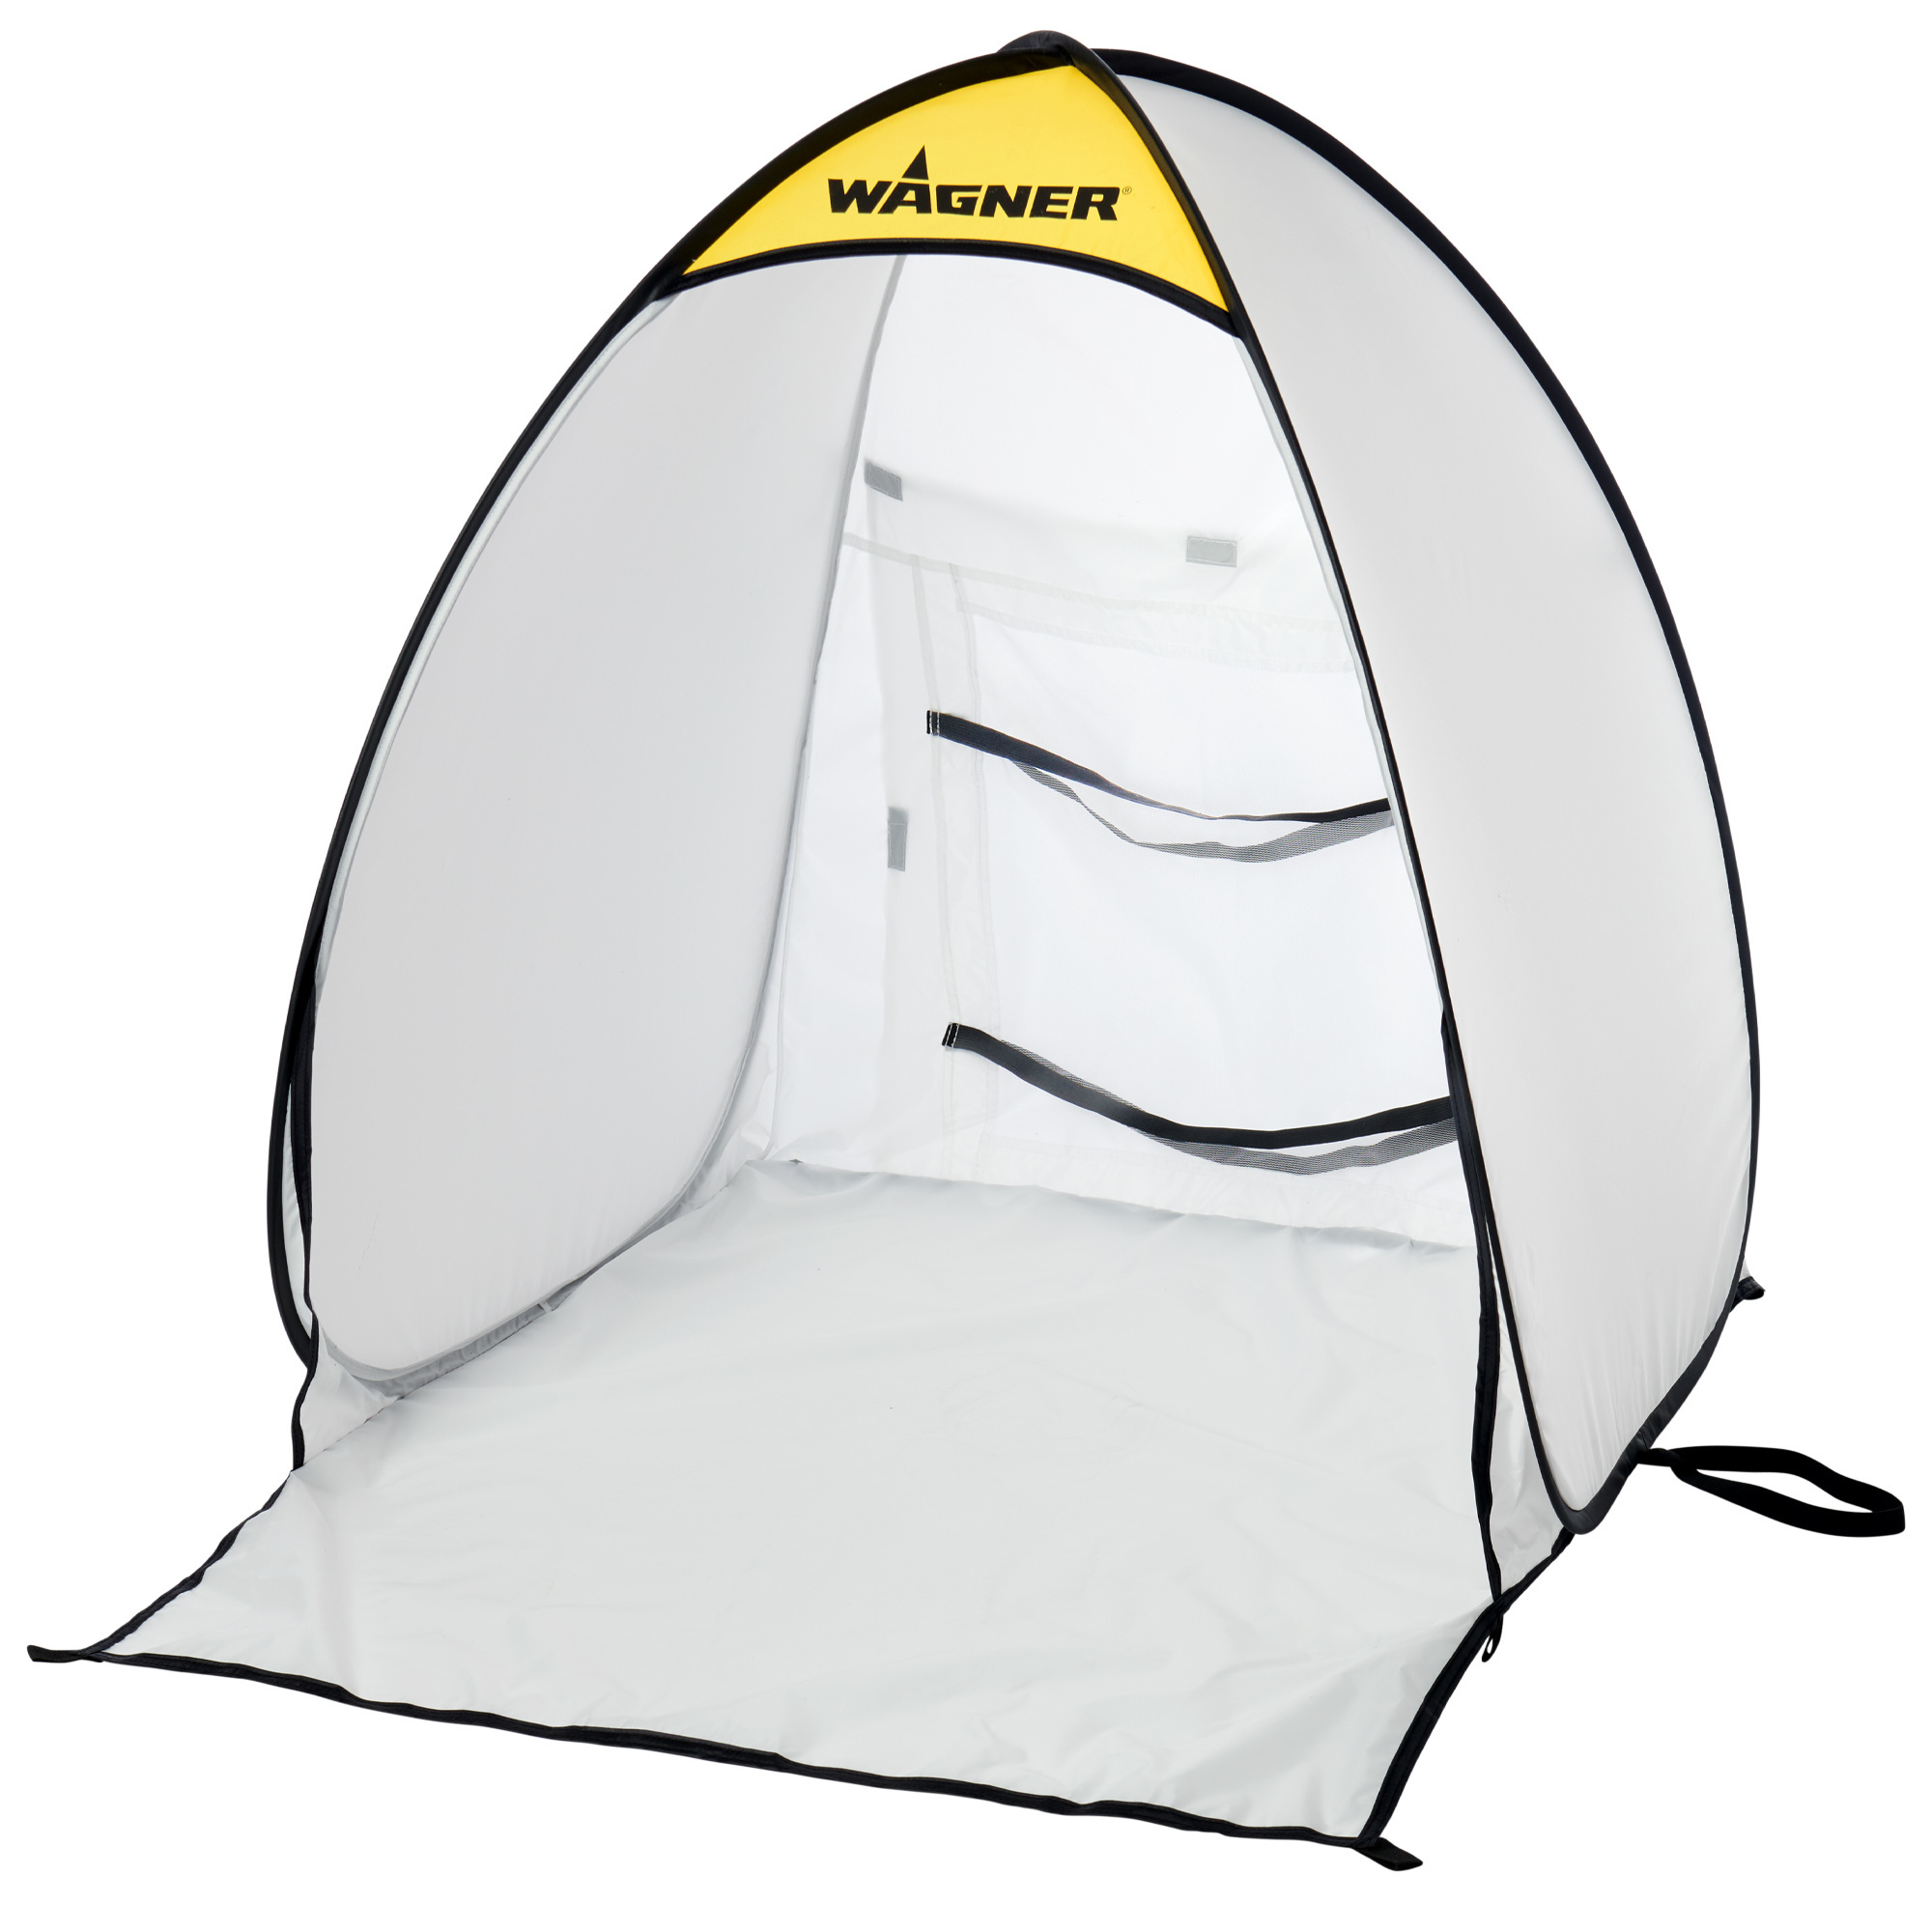 Wagner, Small Shelter, Height 16 in, Model C900051